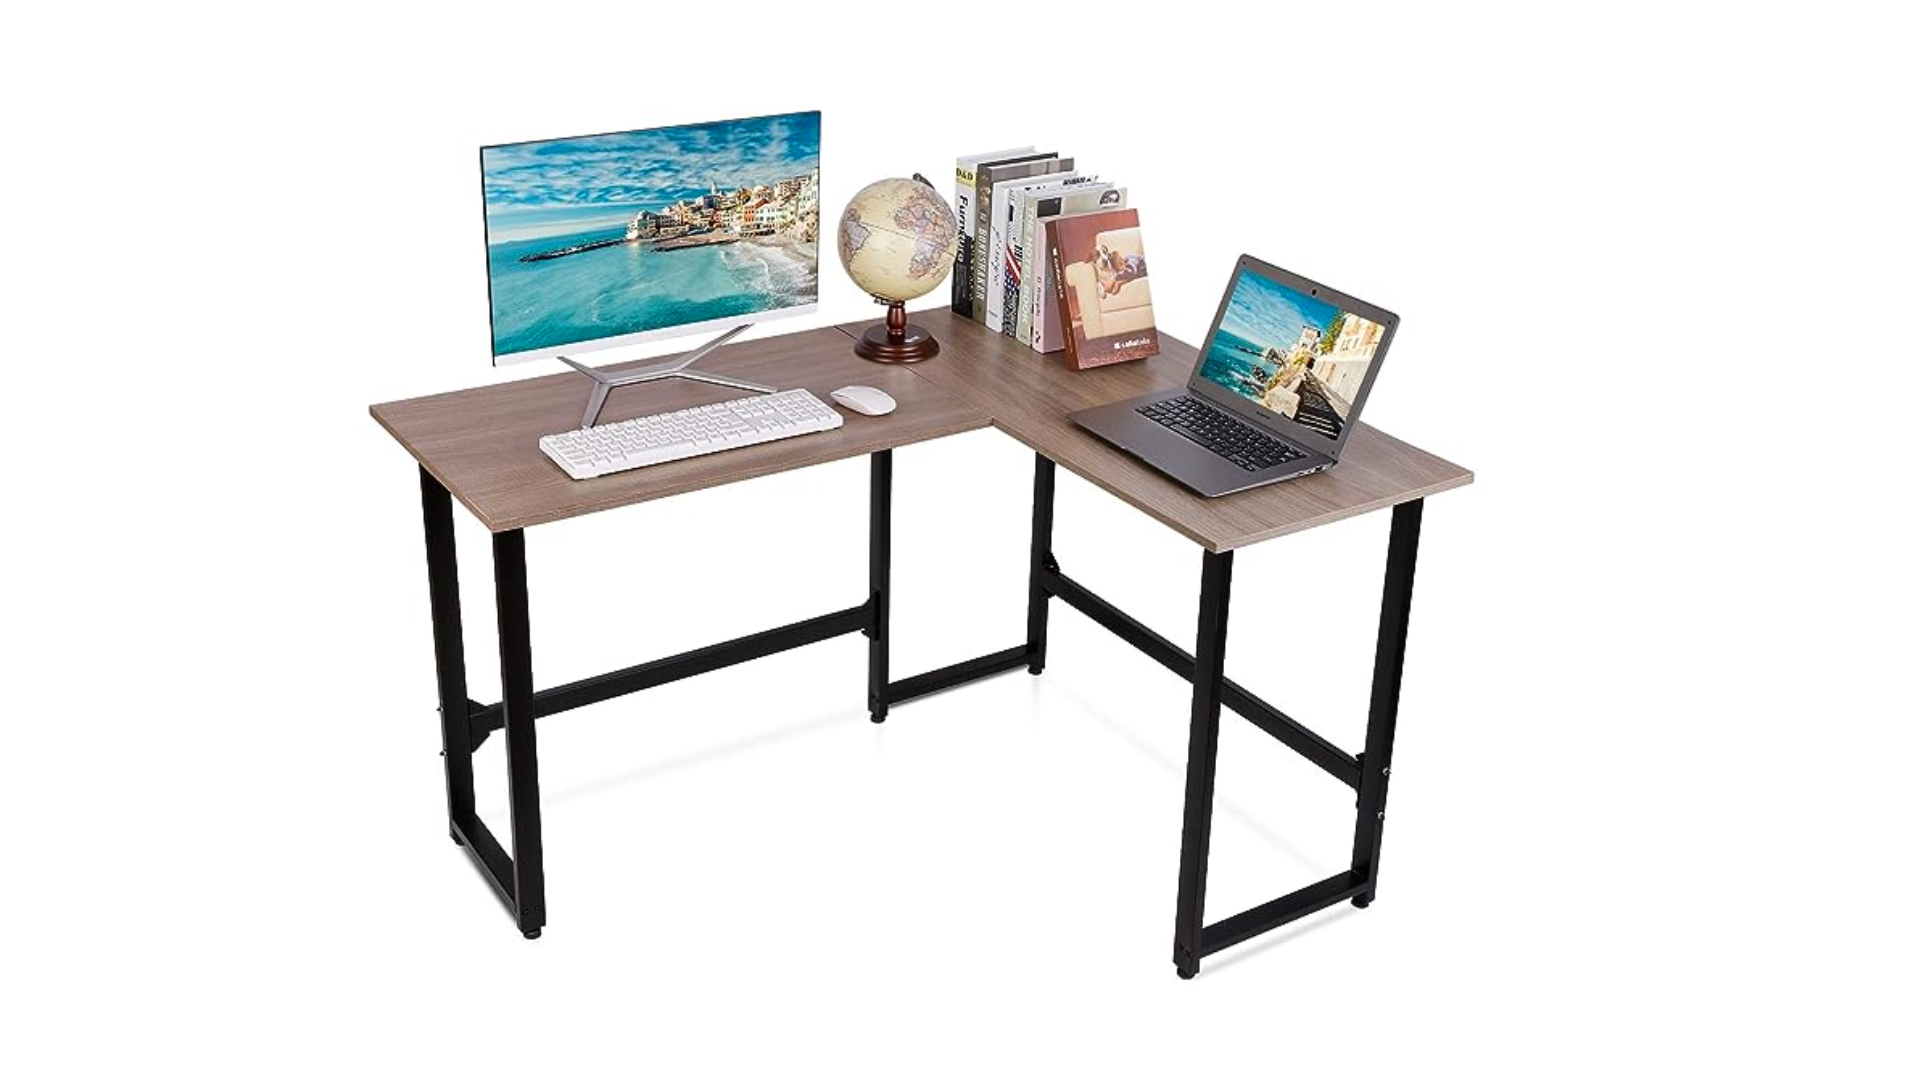 Viewee L-Shaped Computer Desk